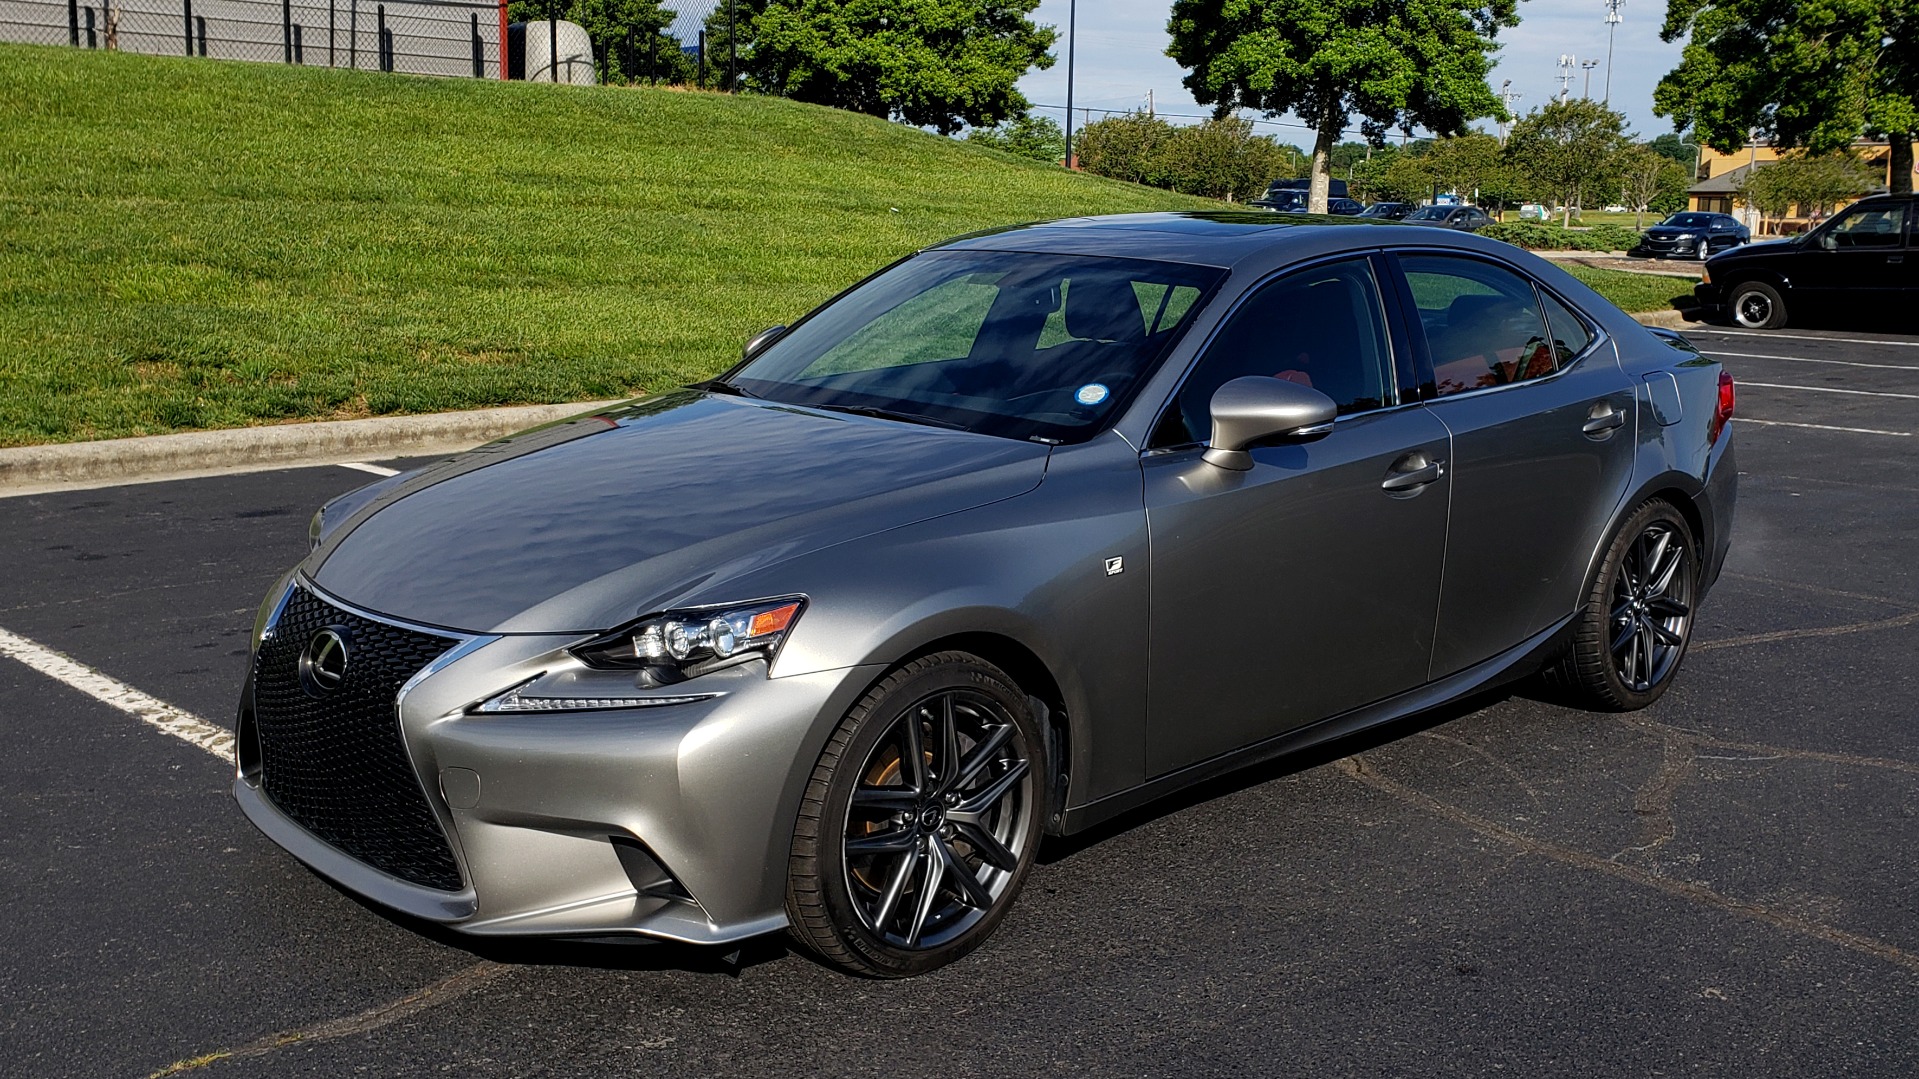 Used 2016 Lexus IS 300 F-SPORT / SUNROOF / BSM / VENTILATED SEATS / REARVIEW for sale Sold at Formula Imports in Charlotte NC 28227 1